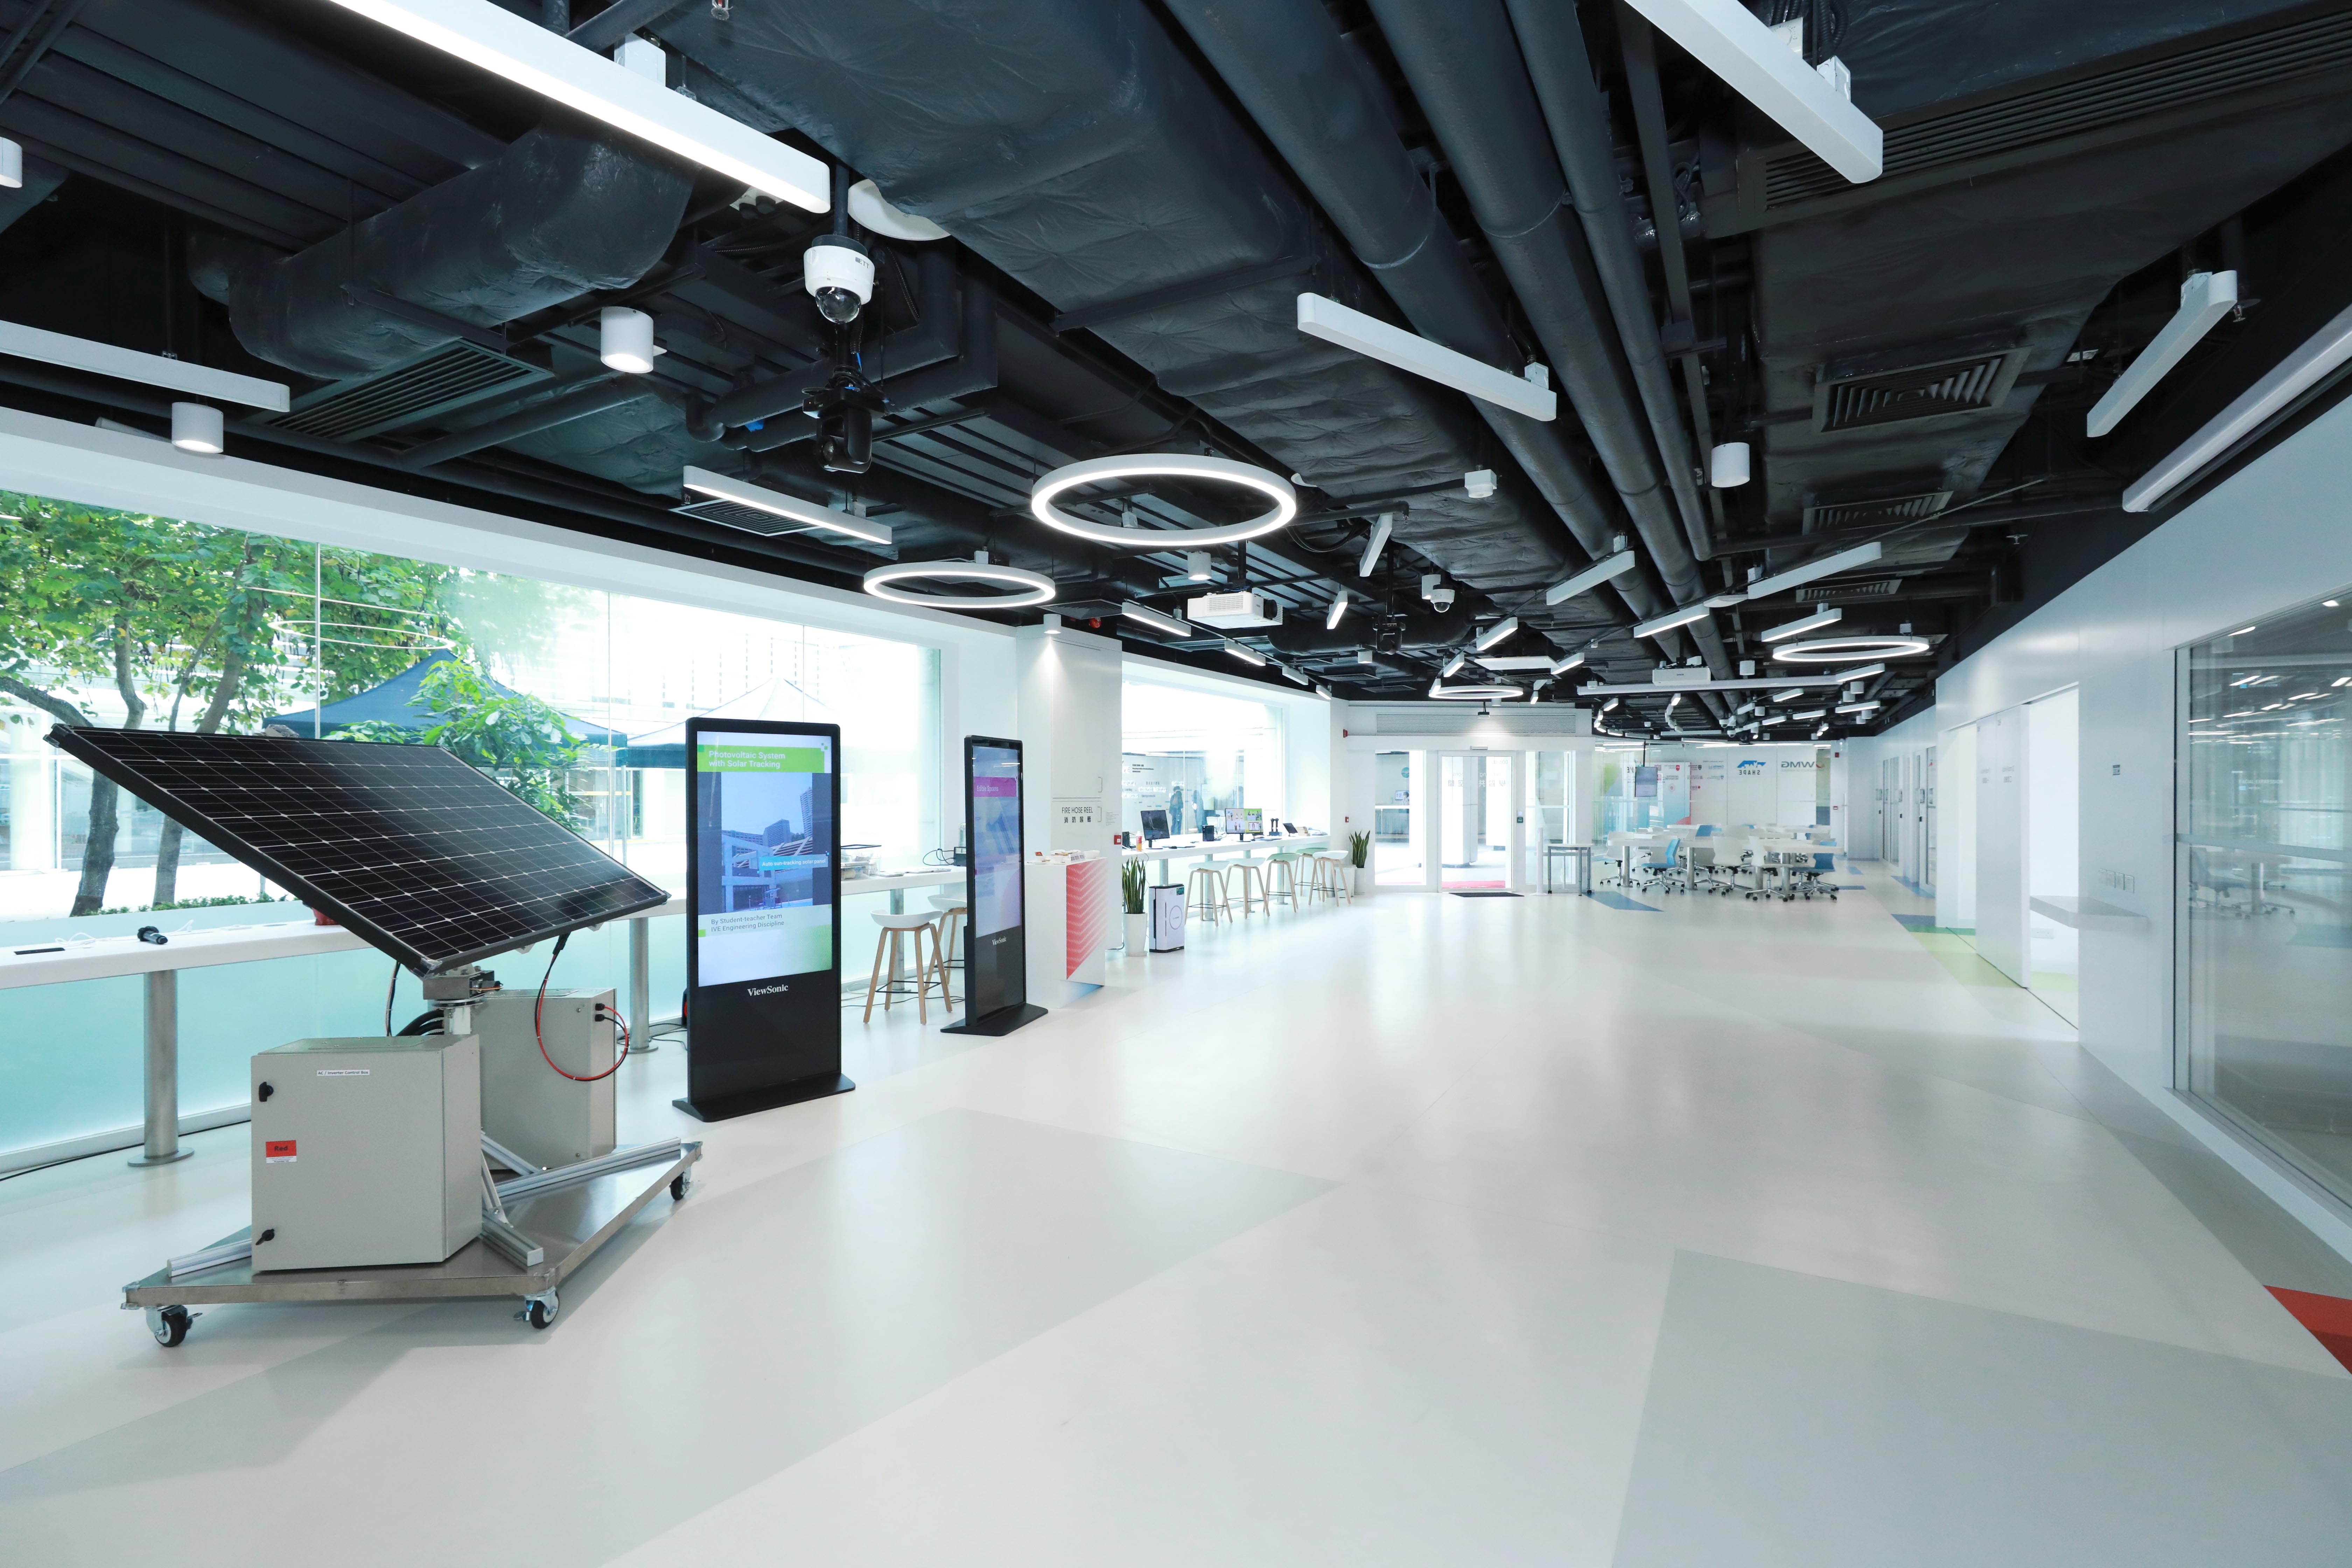 Equipped with a flexible furniture setting 
and advanced computer and audio-visual 
equipment, the “Learning Commons” at
IVE (Chai Wan) encourages interaction
between teachers and students, promoting 
cross-disciplinary collaboration.